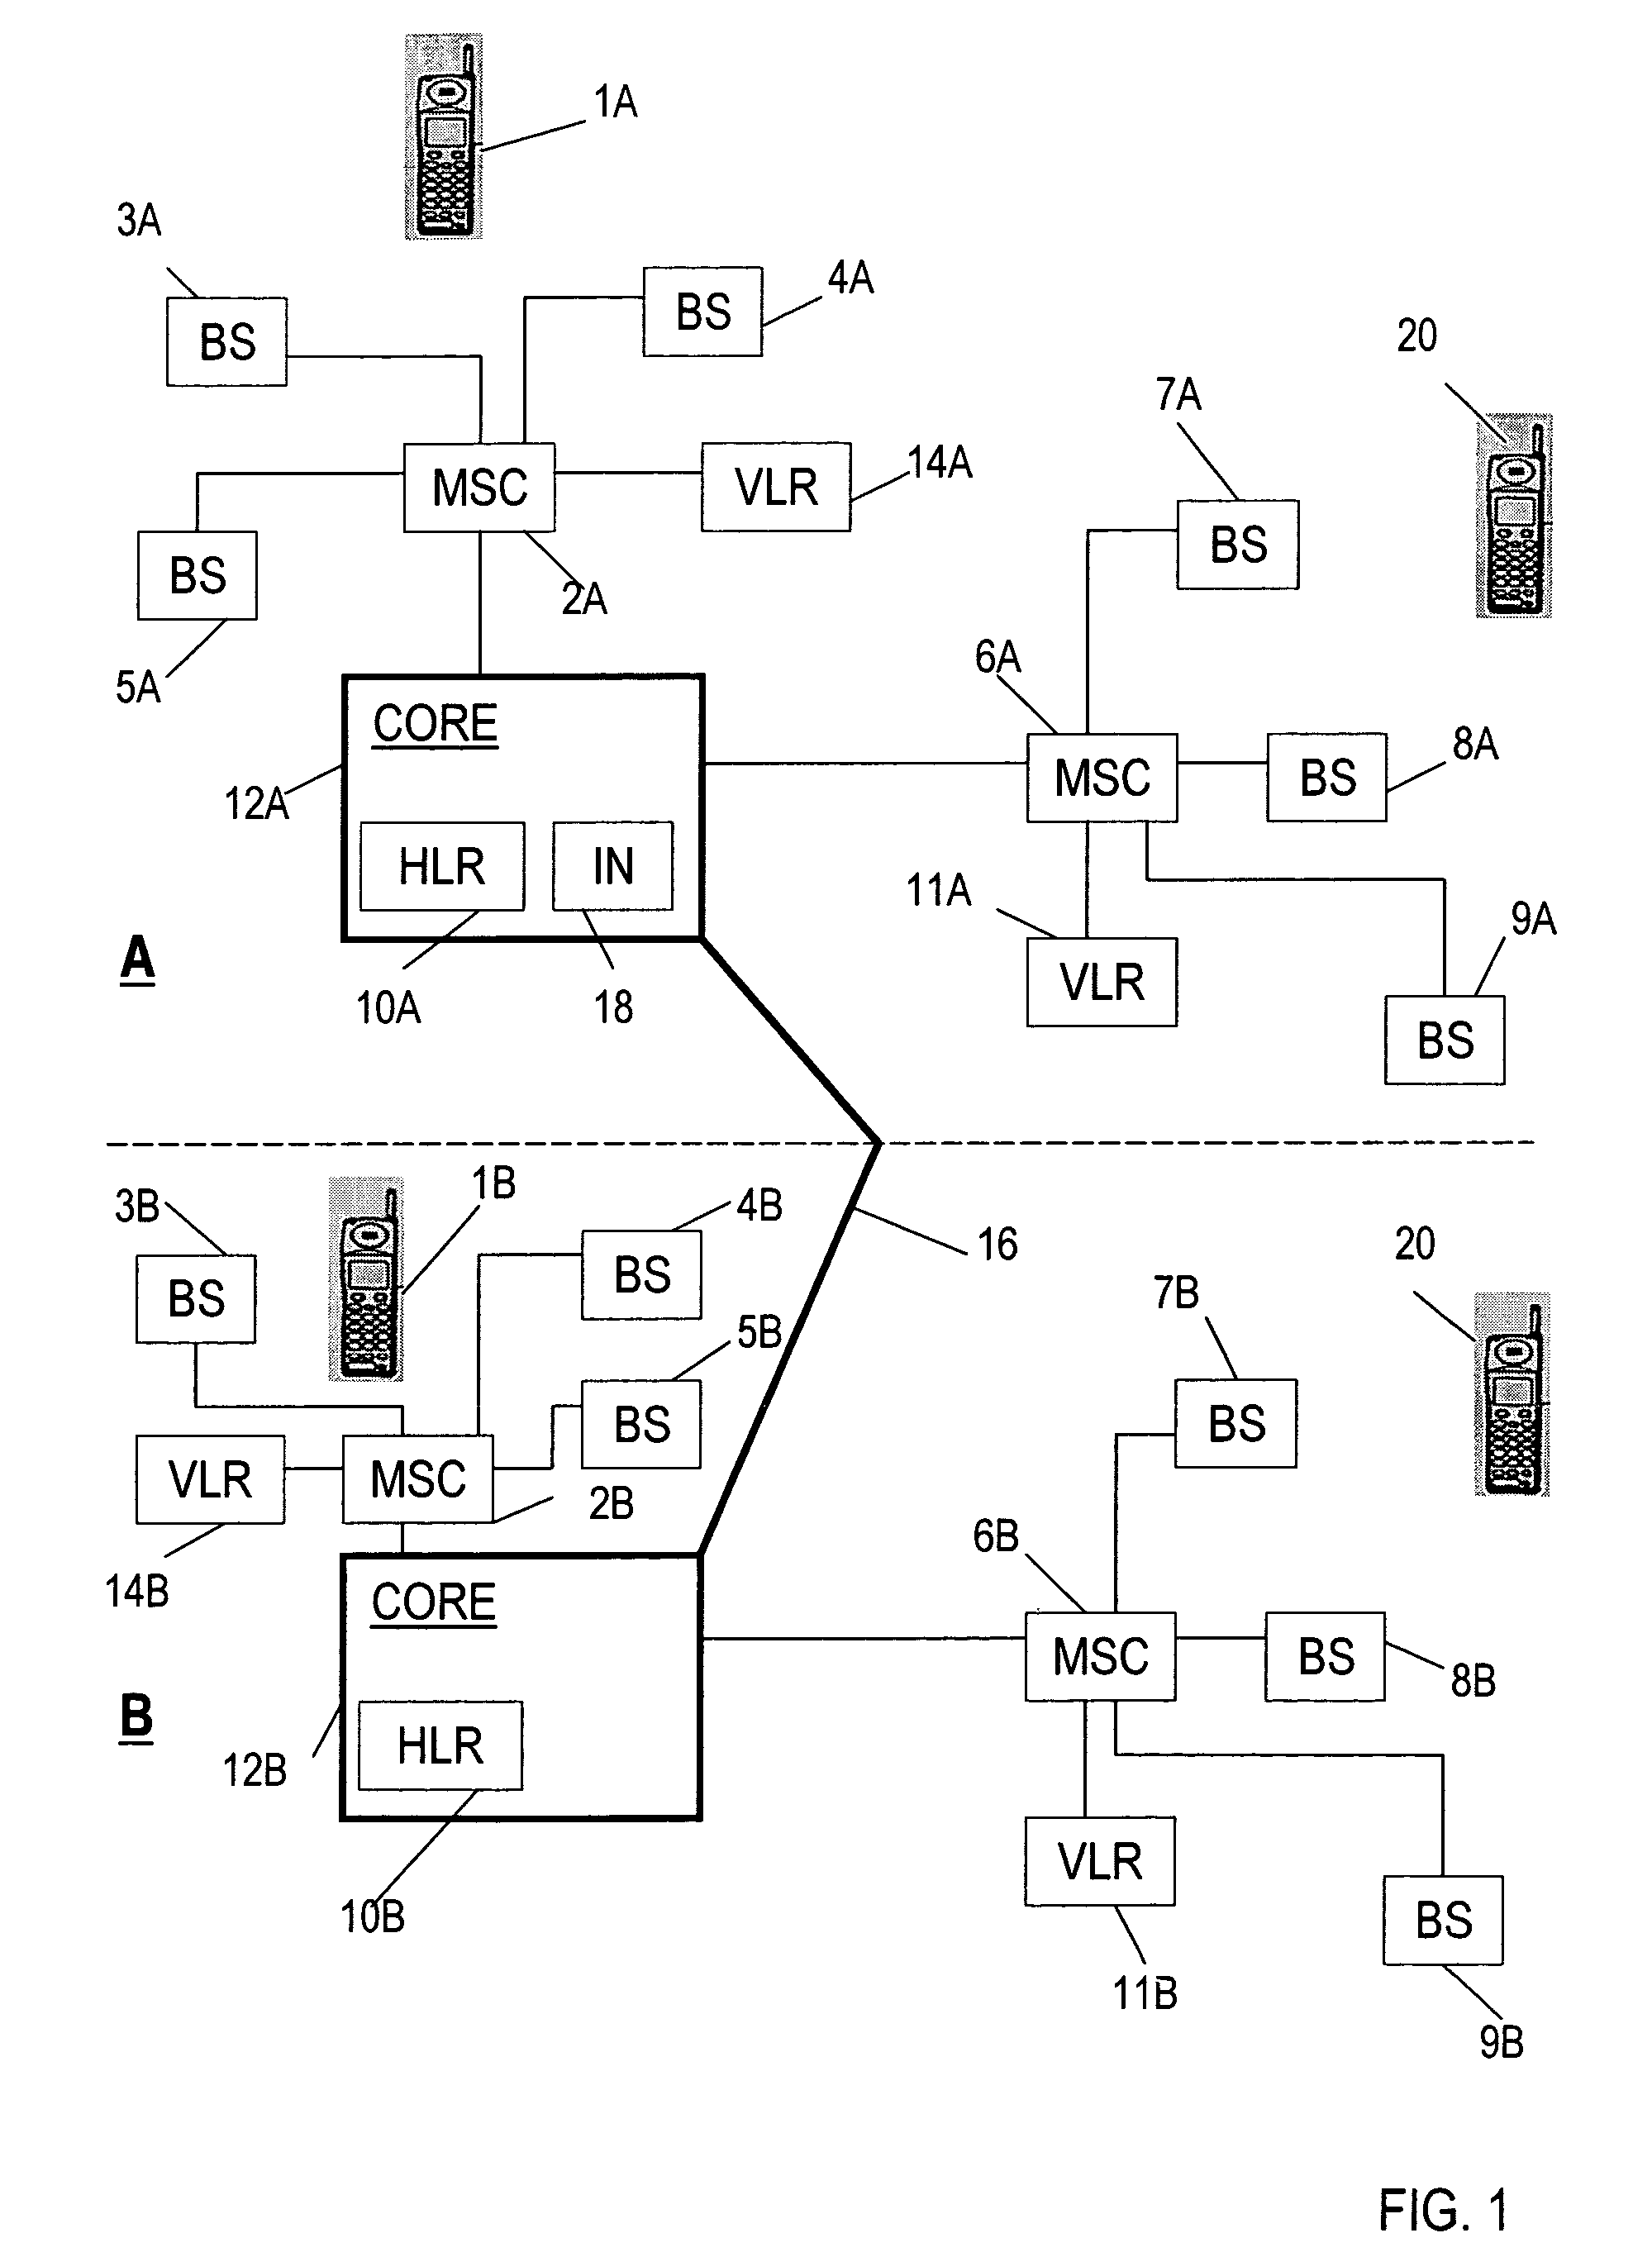 Network communication system including a database of codes and corresponding telephone numbers